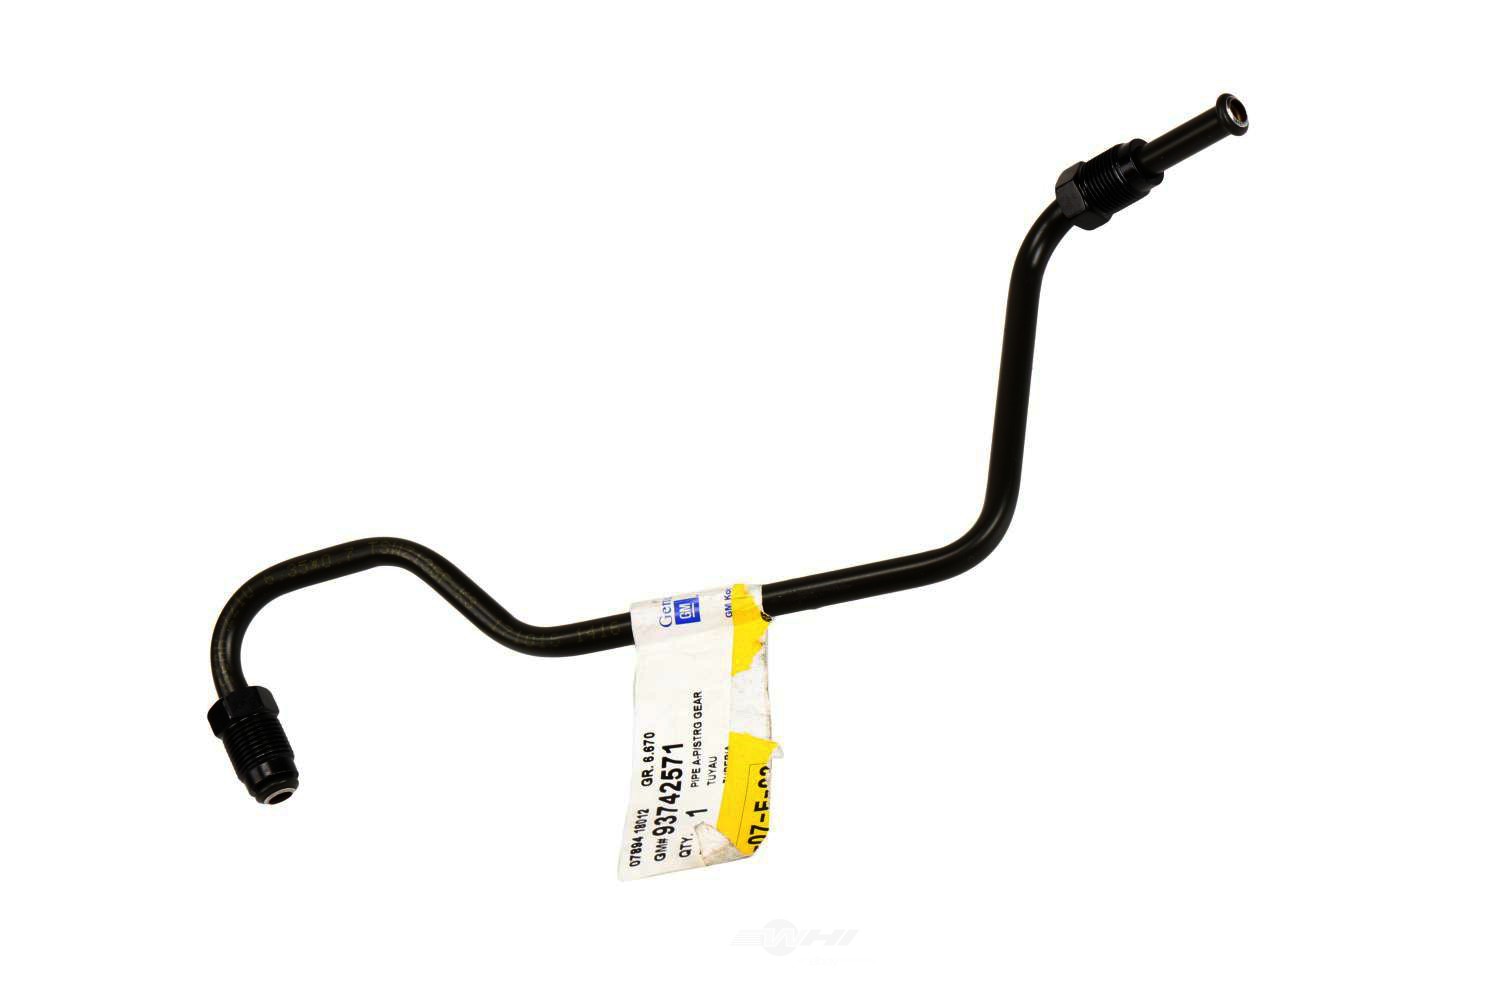 GM GENUINE PARTS - Rack and Pinion Hydraulic Transfer Tubing Assembly - GMP 93742571